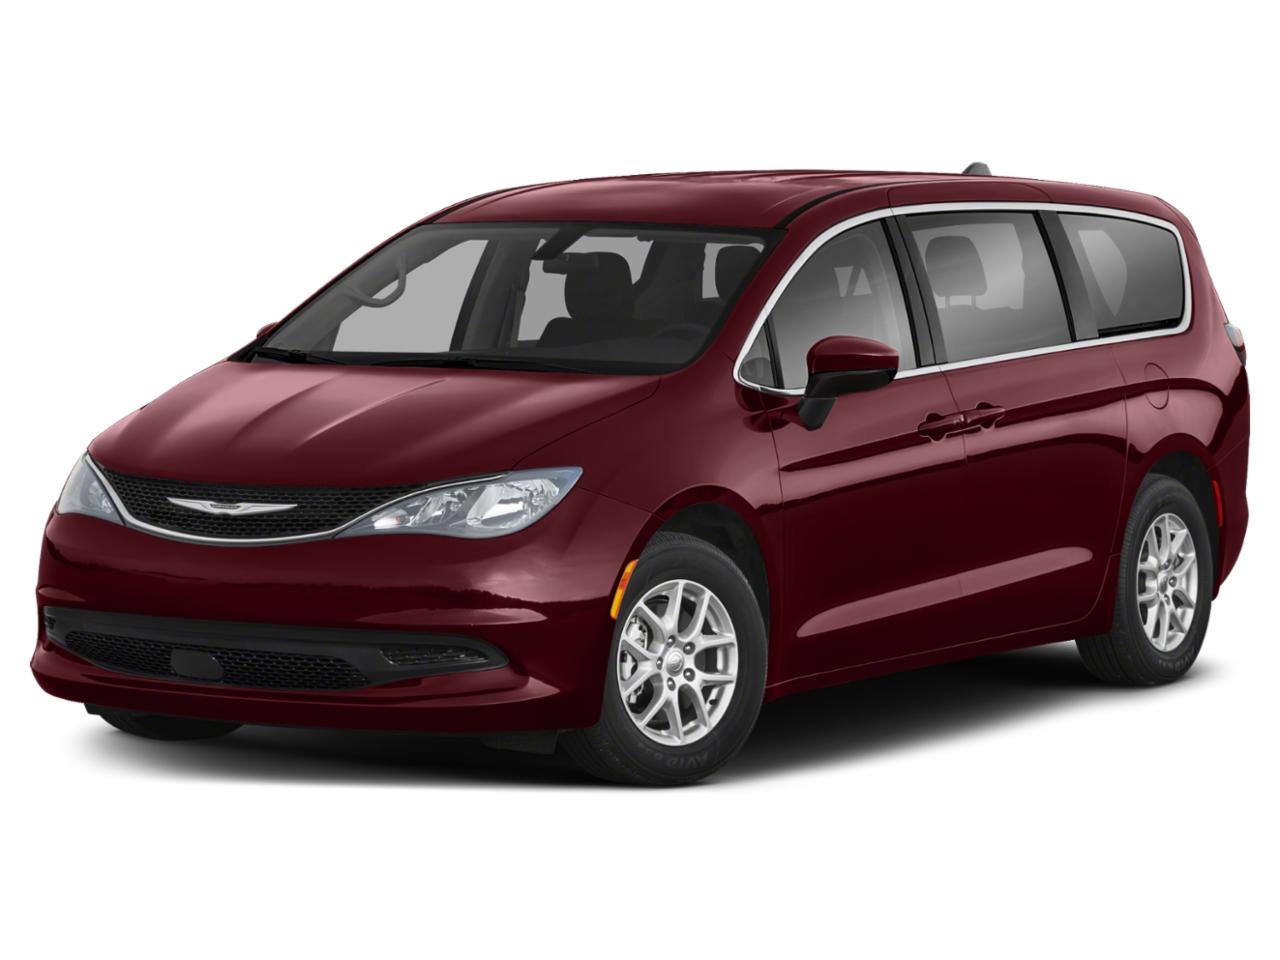 2021 Chrysler Voyager Vehicle Photo in Forest Park, IL 60130